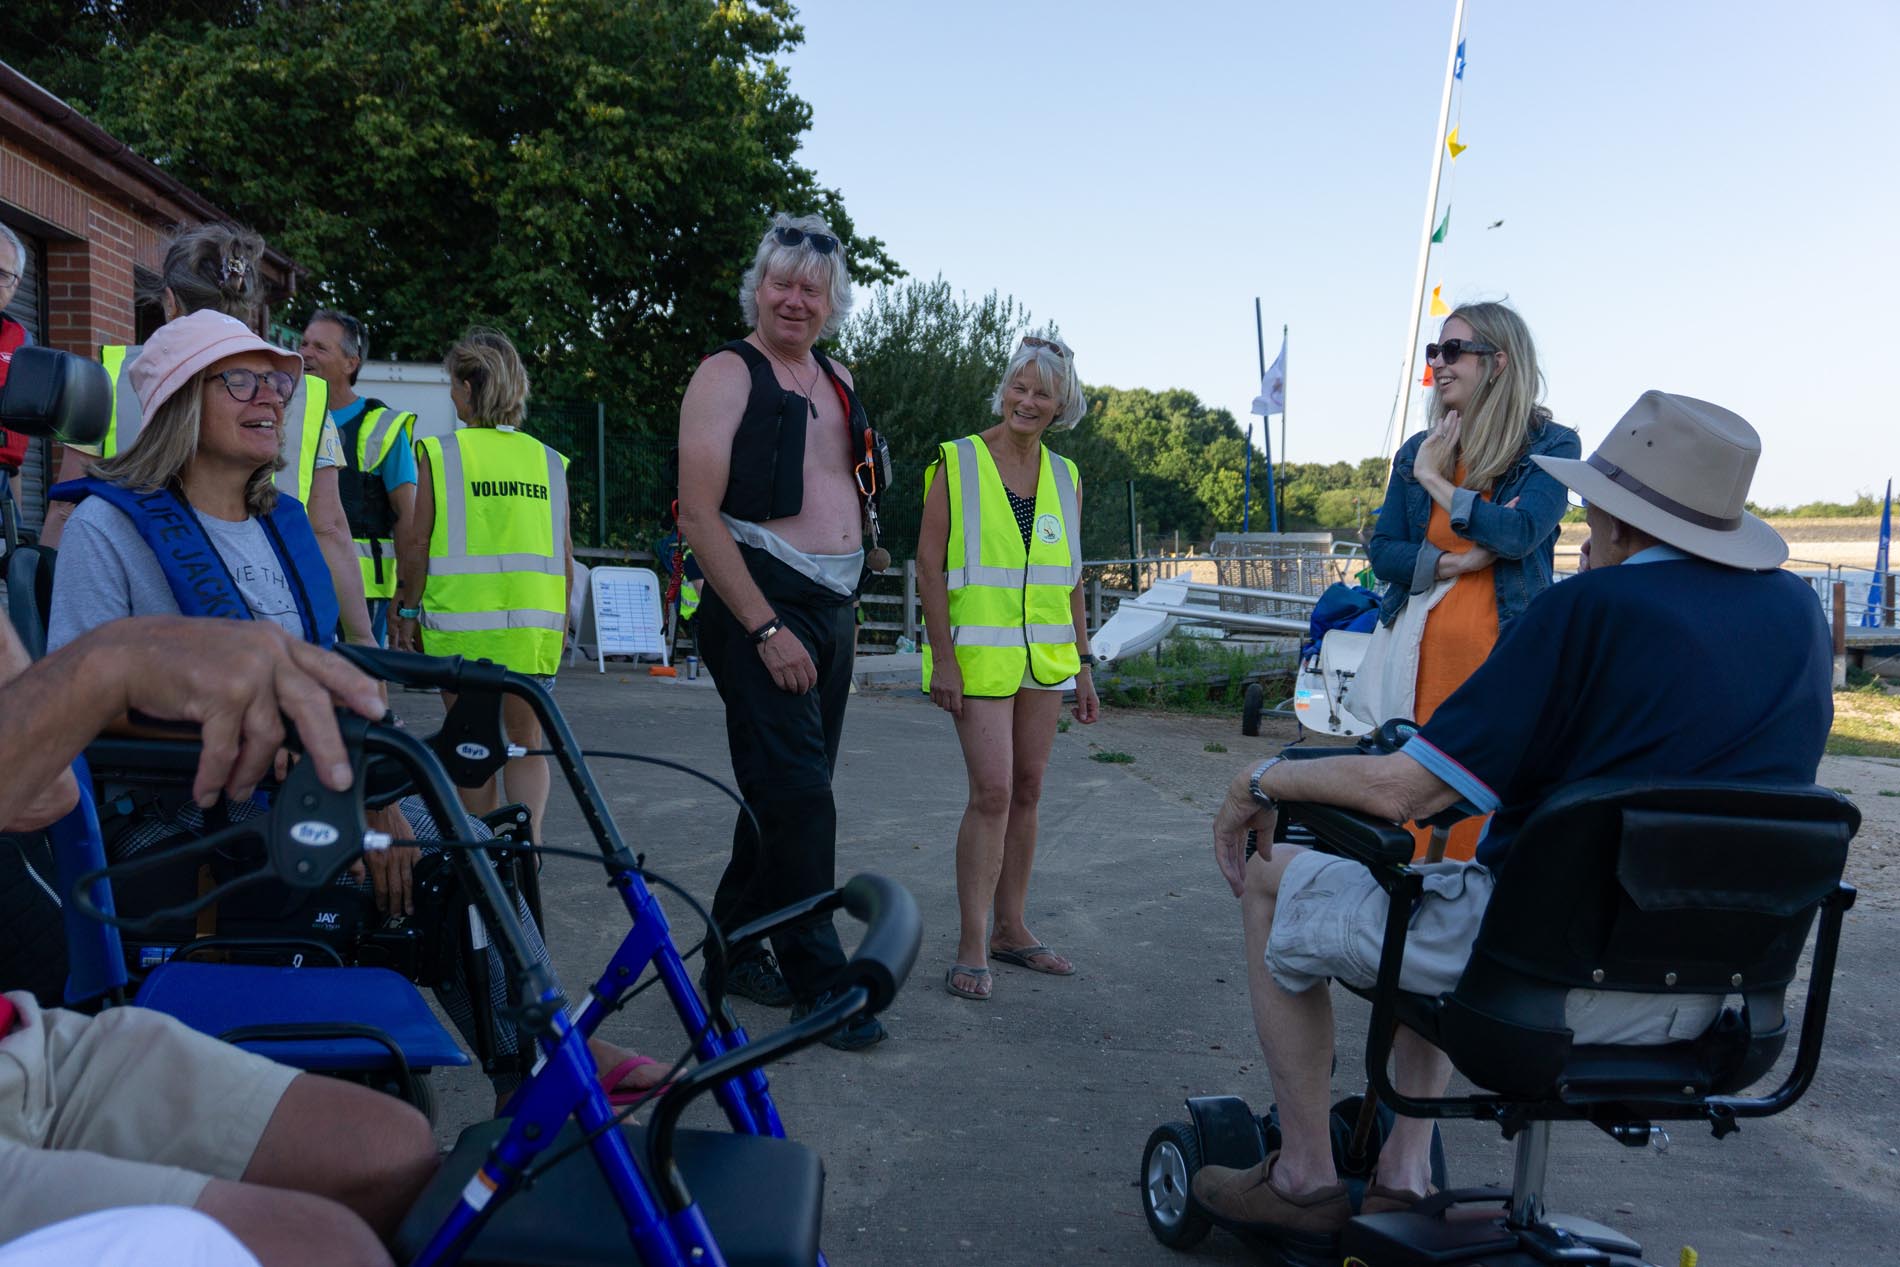 Sailability Session &amp; Barbecue - Friday 12th August 2022